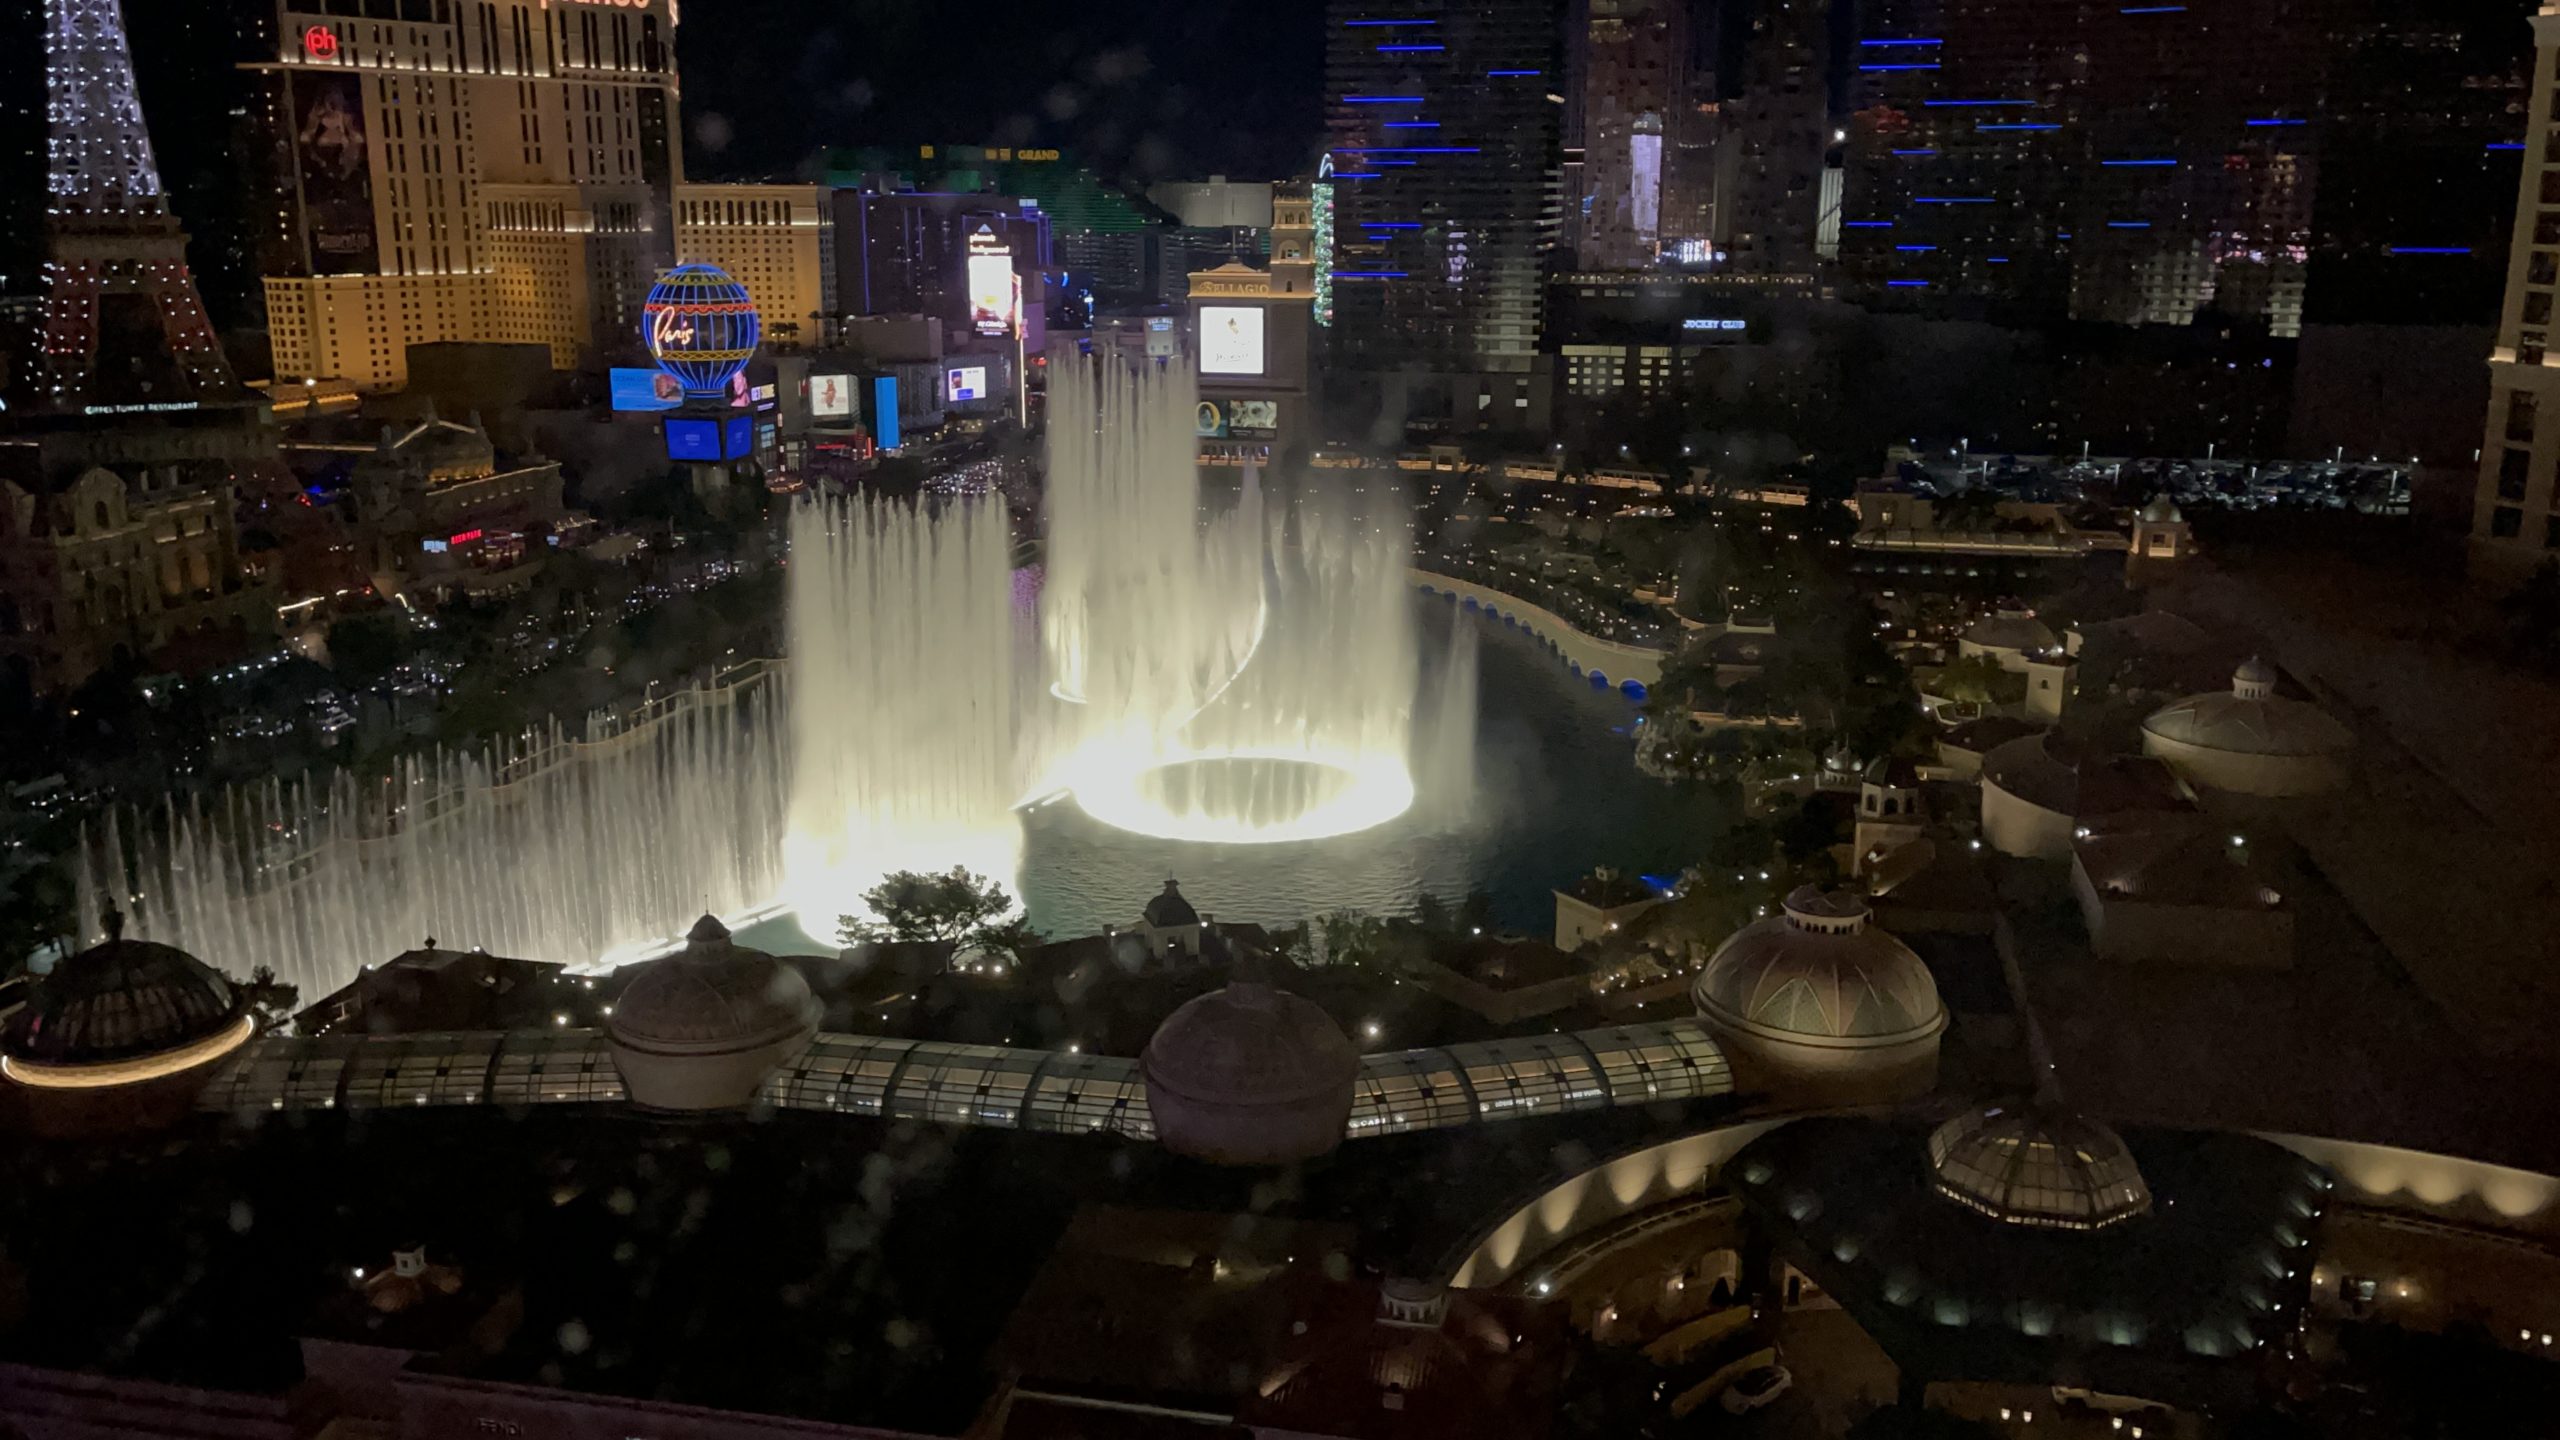 Bellagio - fountain view King bedroom - photo review : r/vegas